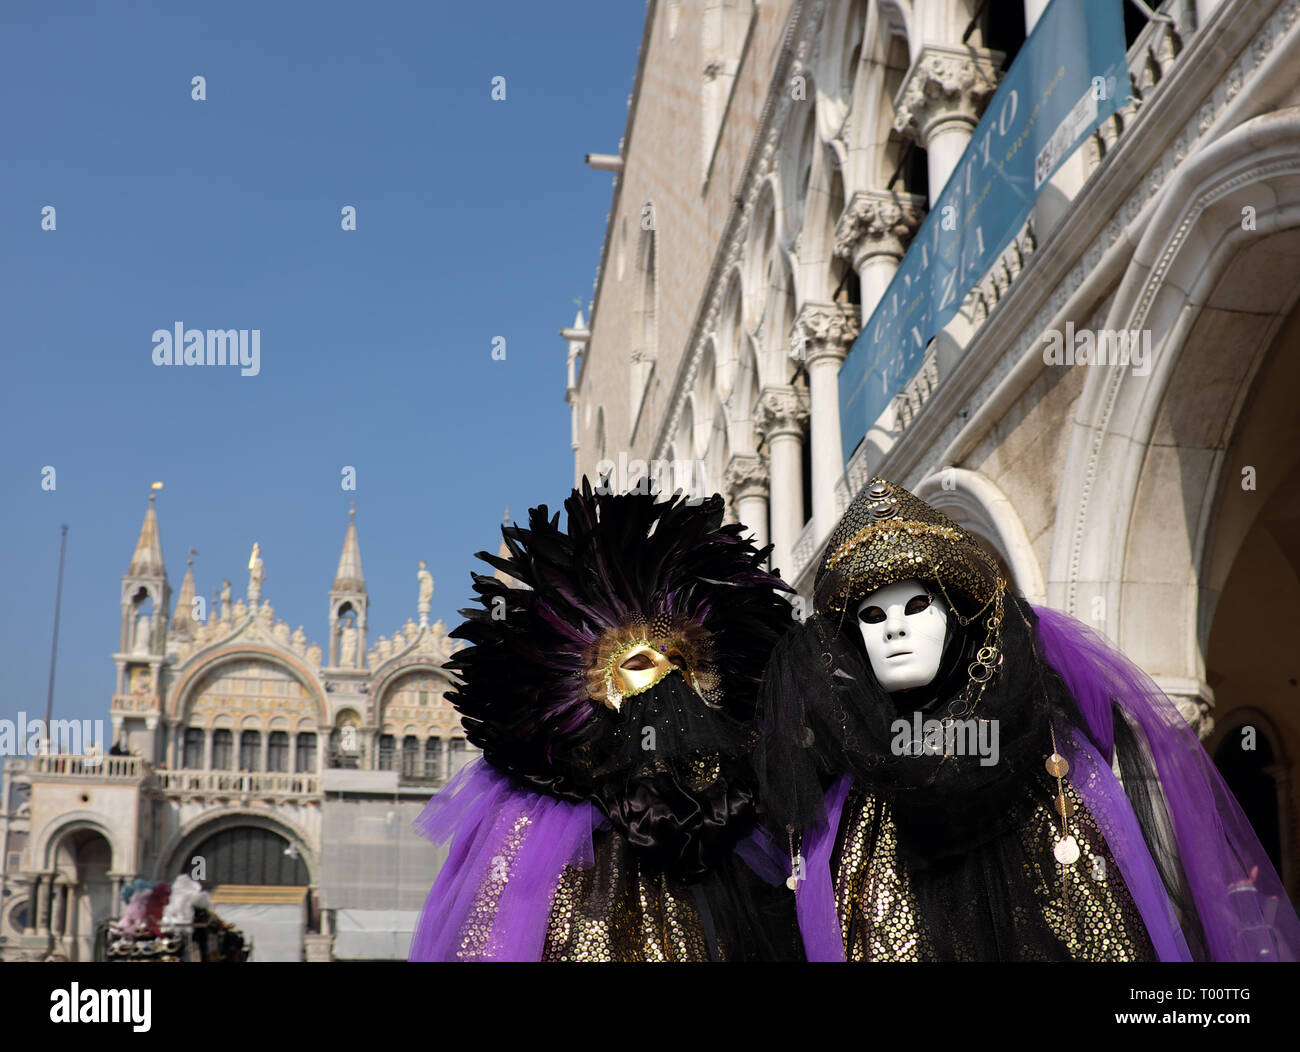 Couple dressed in traditional mask and costume for Venice Carnival standing in Piazza San Marco in front of Saint Mark's Basilica, Venice, Veneto, Ita Stock Photo